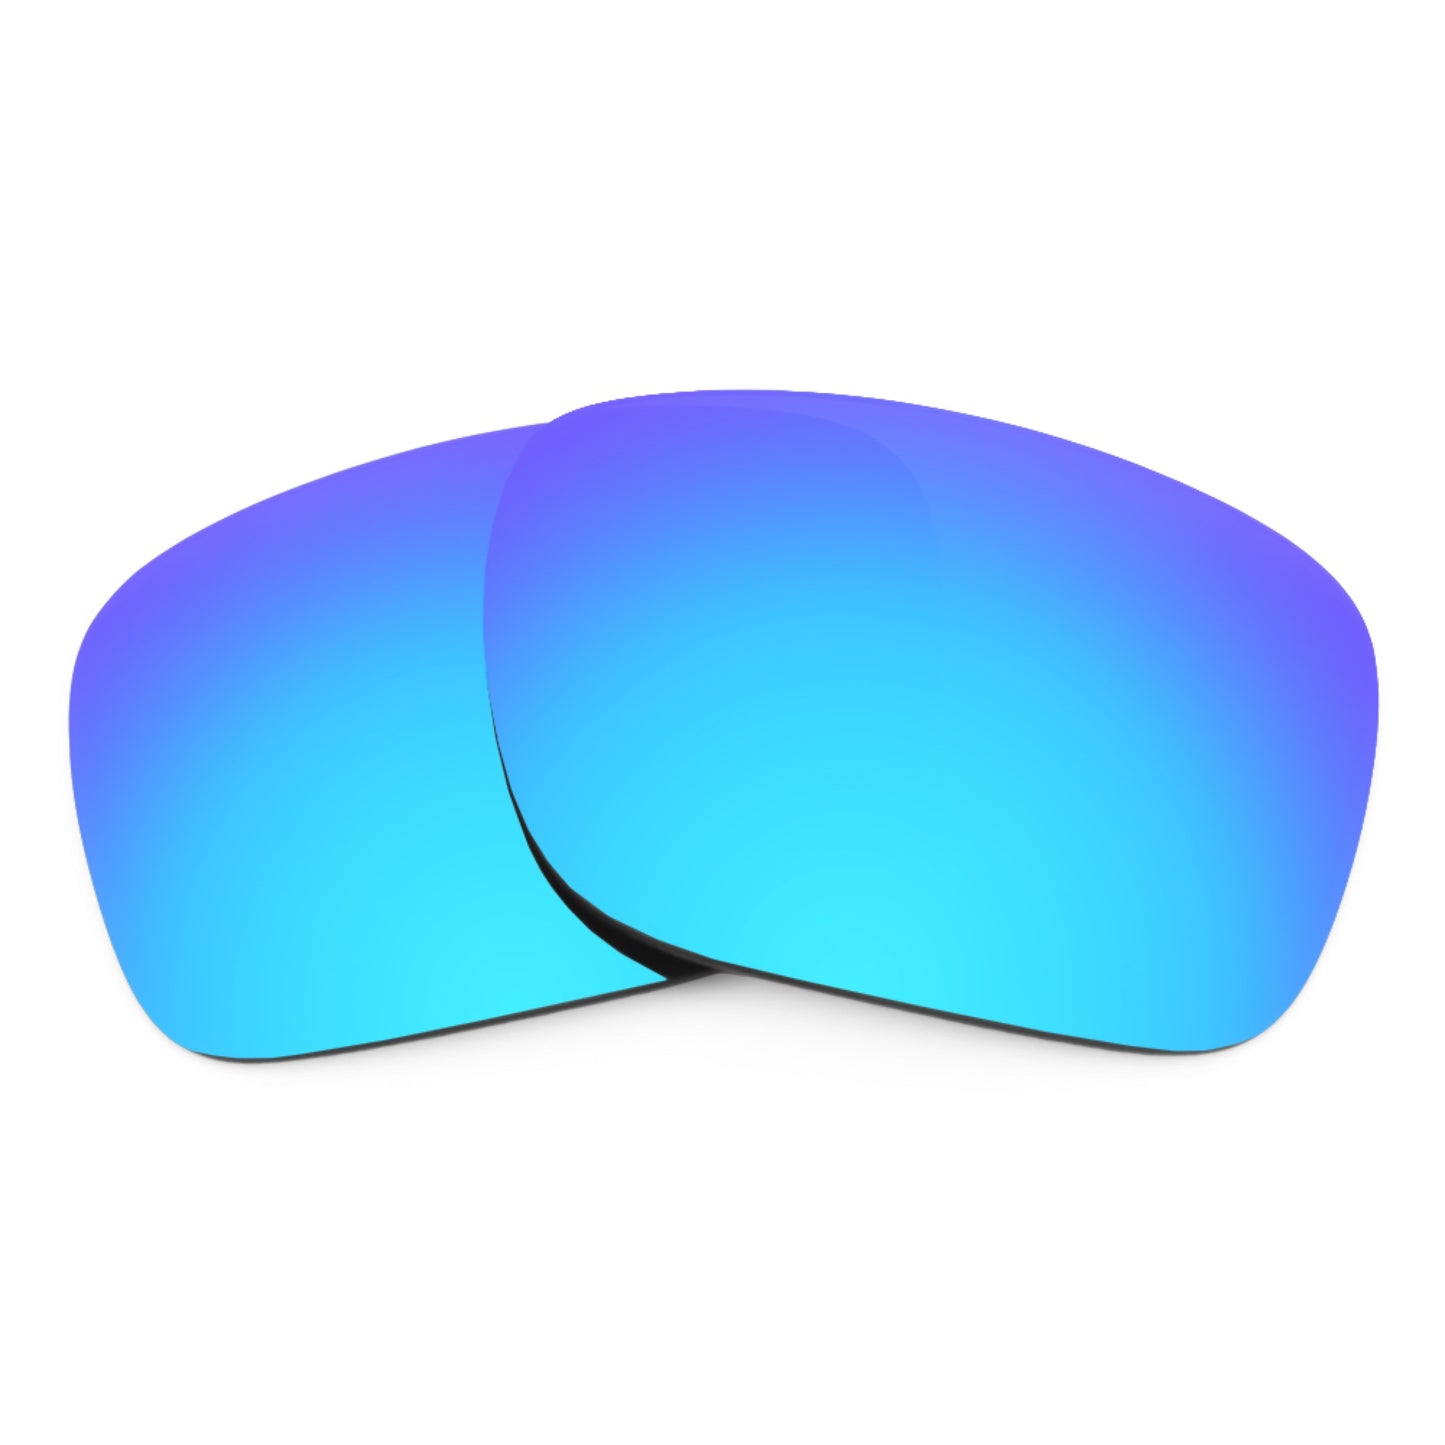 Revant replacement lenses for Ray-Ban RB4174 56mm Non-Polarized Ice Blue